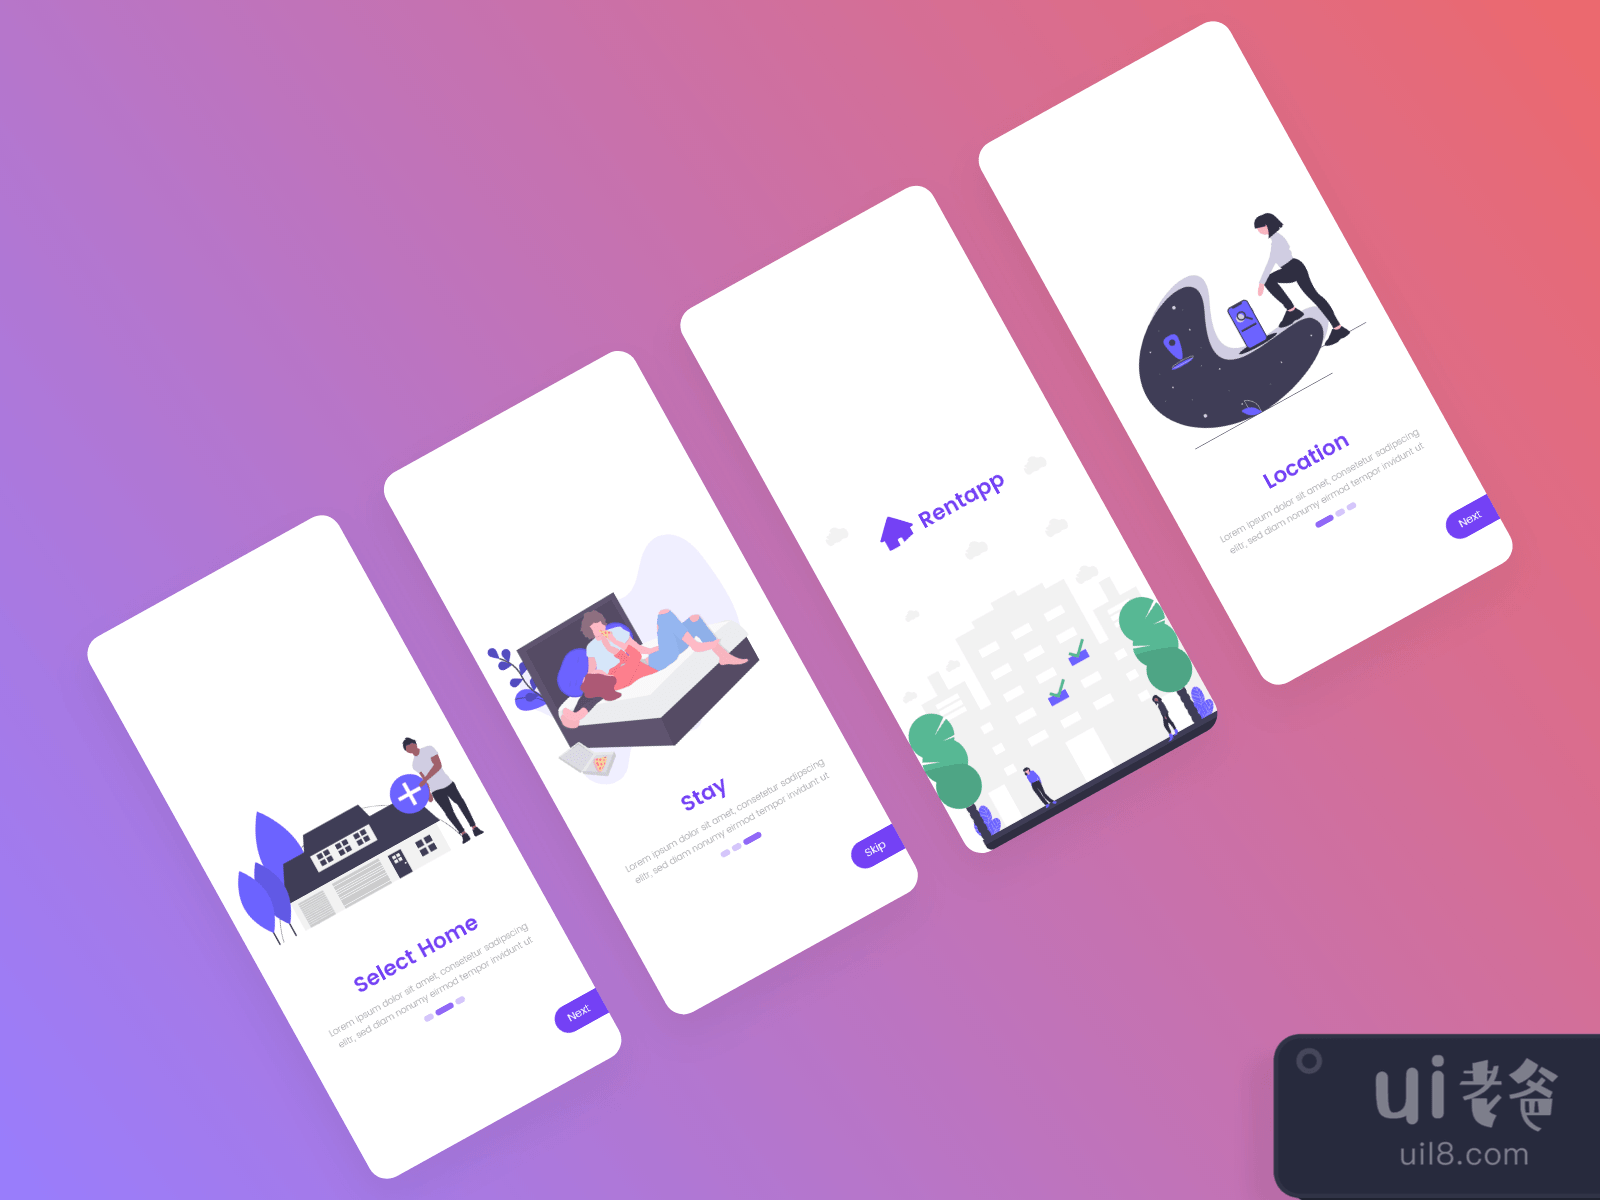 Rent App for Figma and Adobe XD No 3